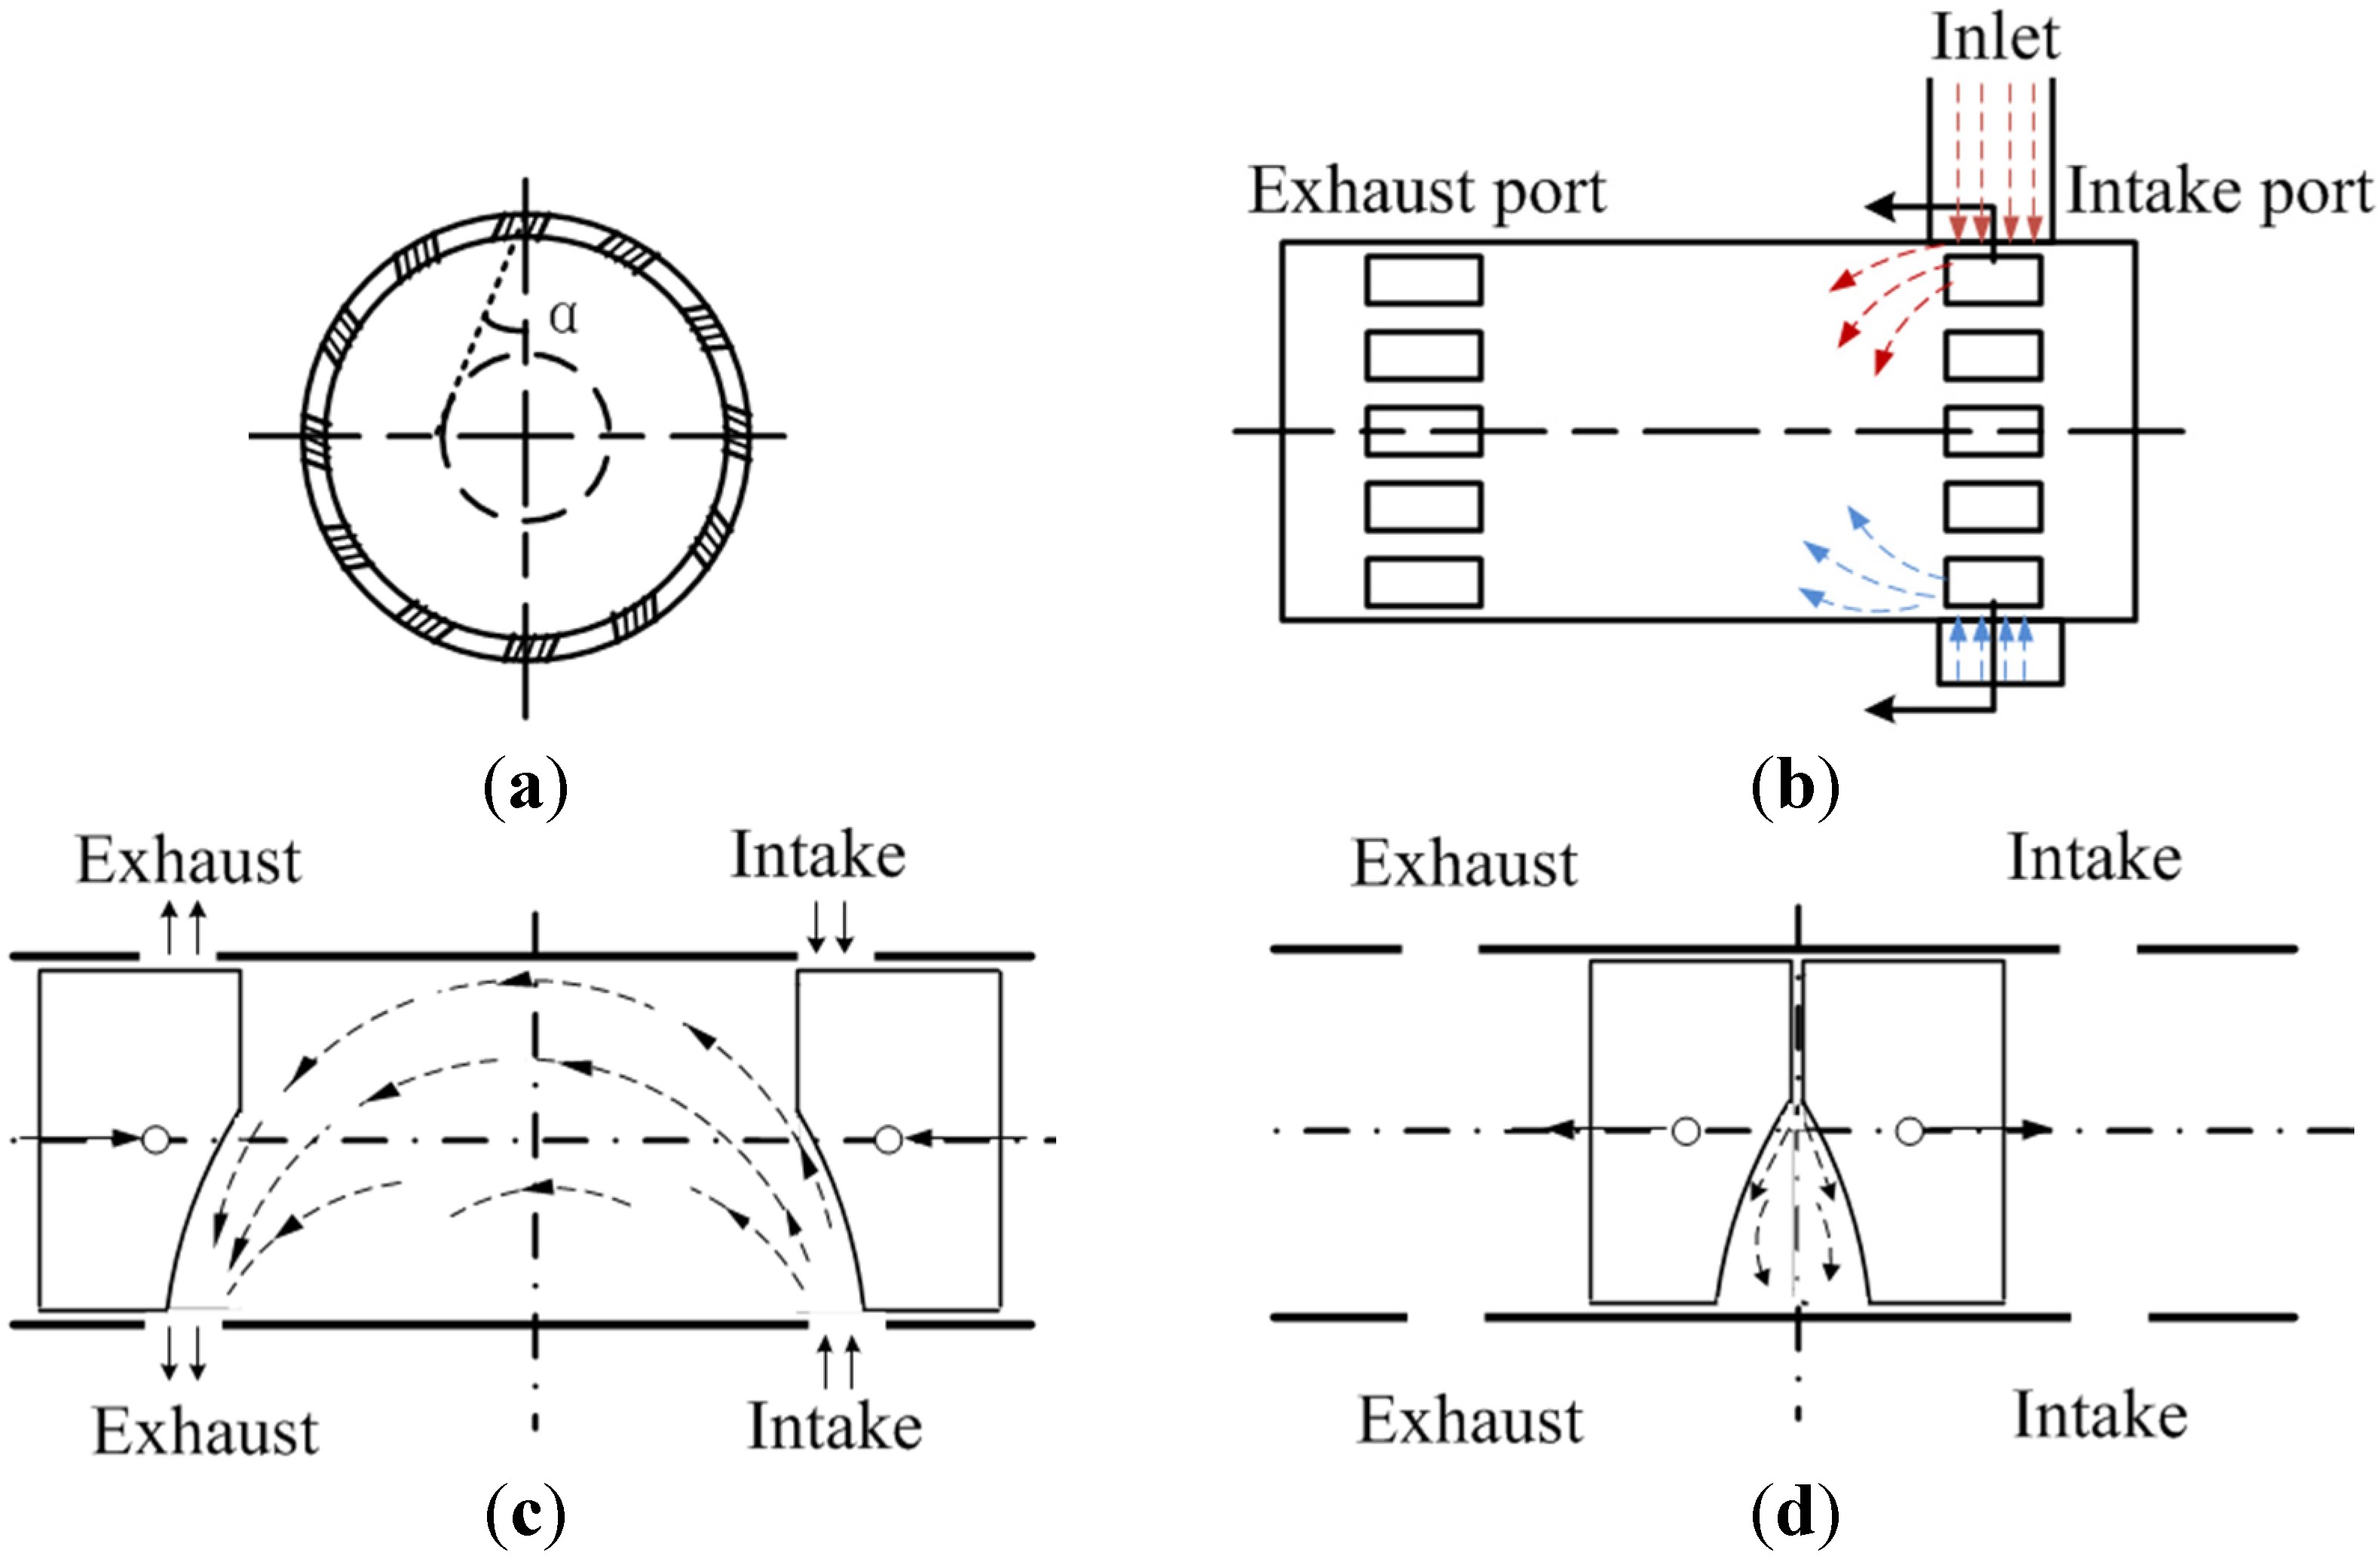 Port Timing Diagram Of Two Stroke Engine Energies Free Full Text Of Port Timing Diagram Of Two Stroke Engine